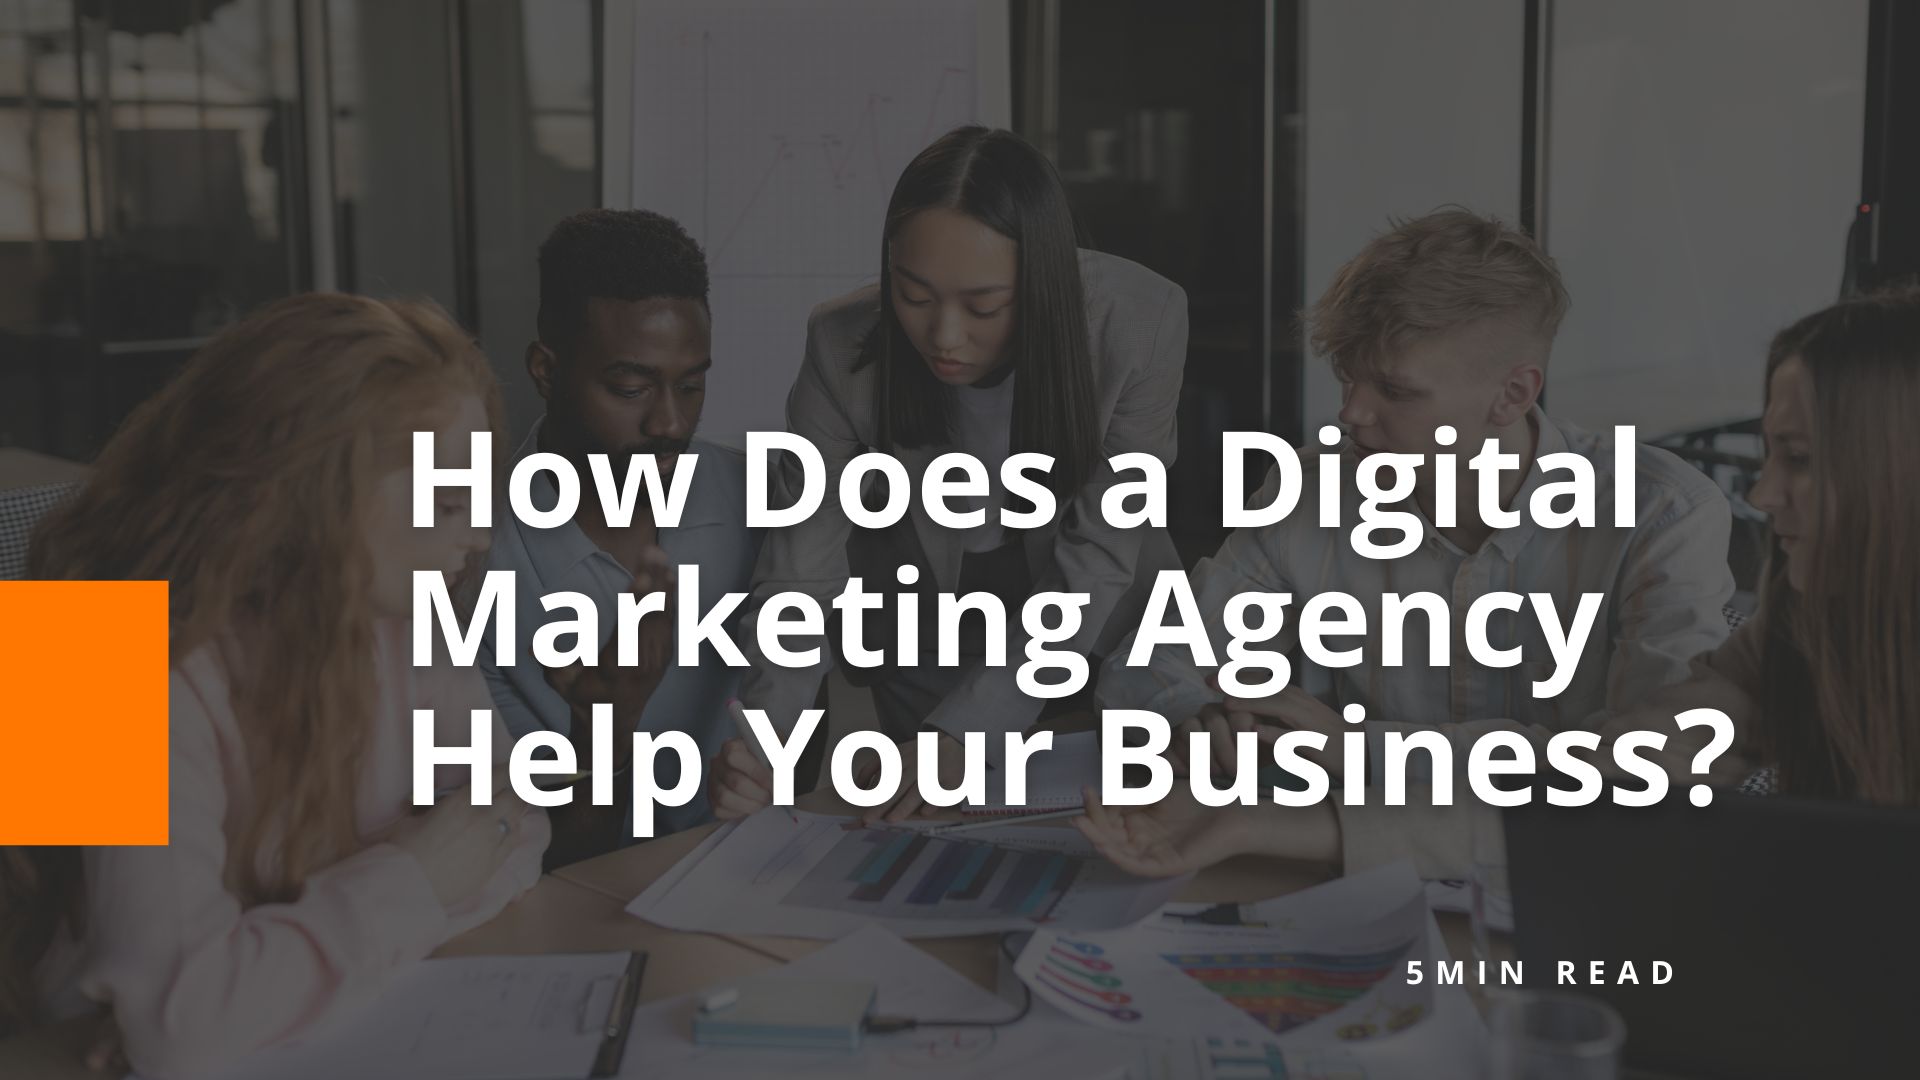 6 Reasons to Partner with a Digital Marketing Agency - BOM